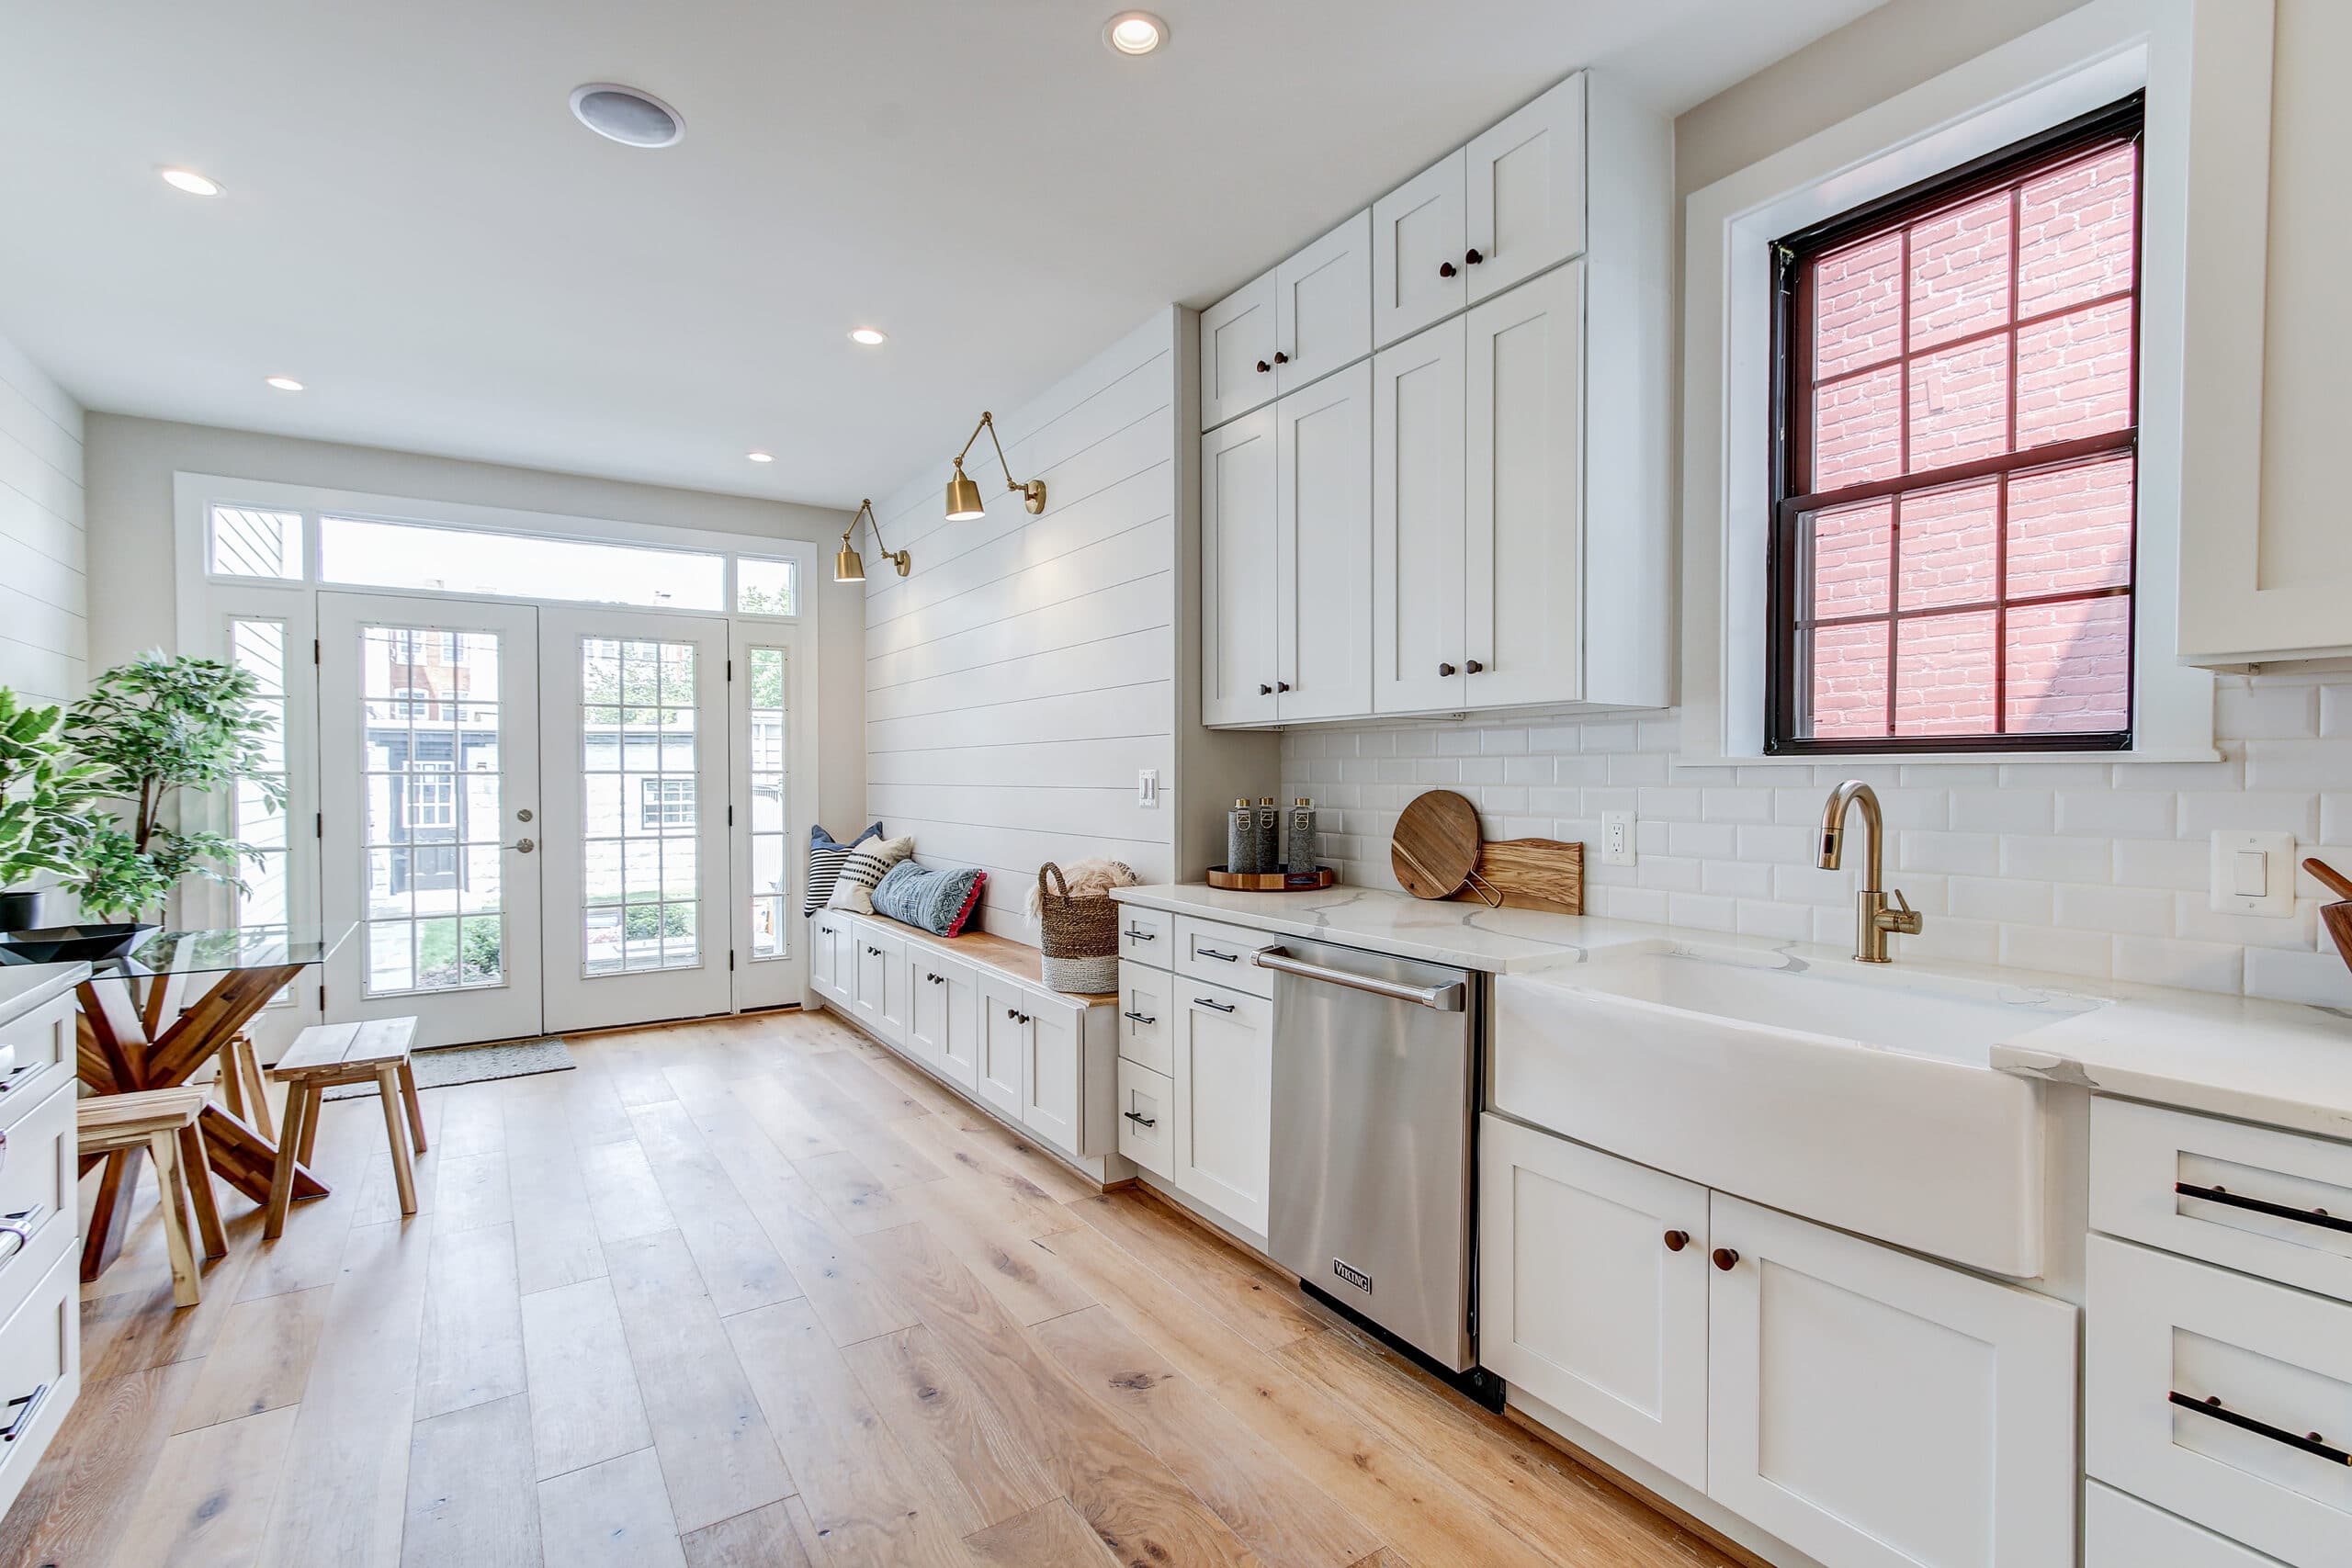 Kitchen Flooring Options: Which One Should You Choose?